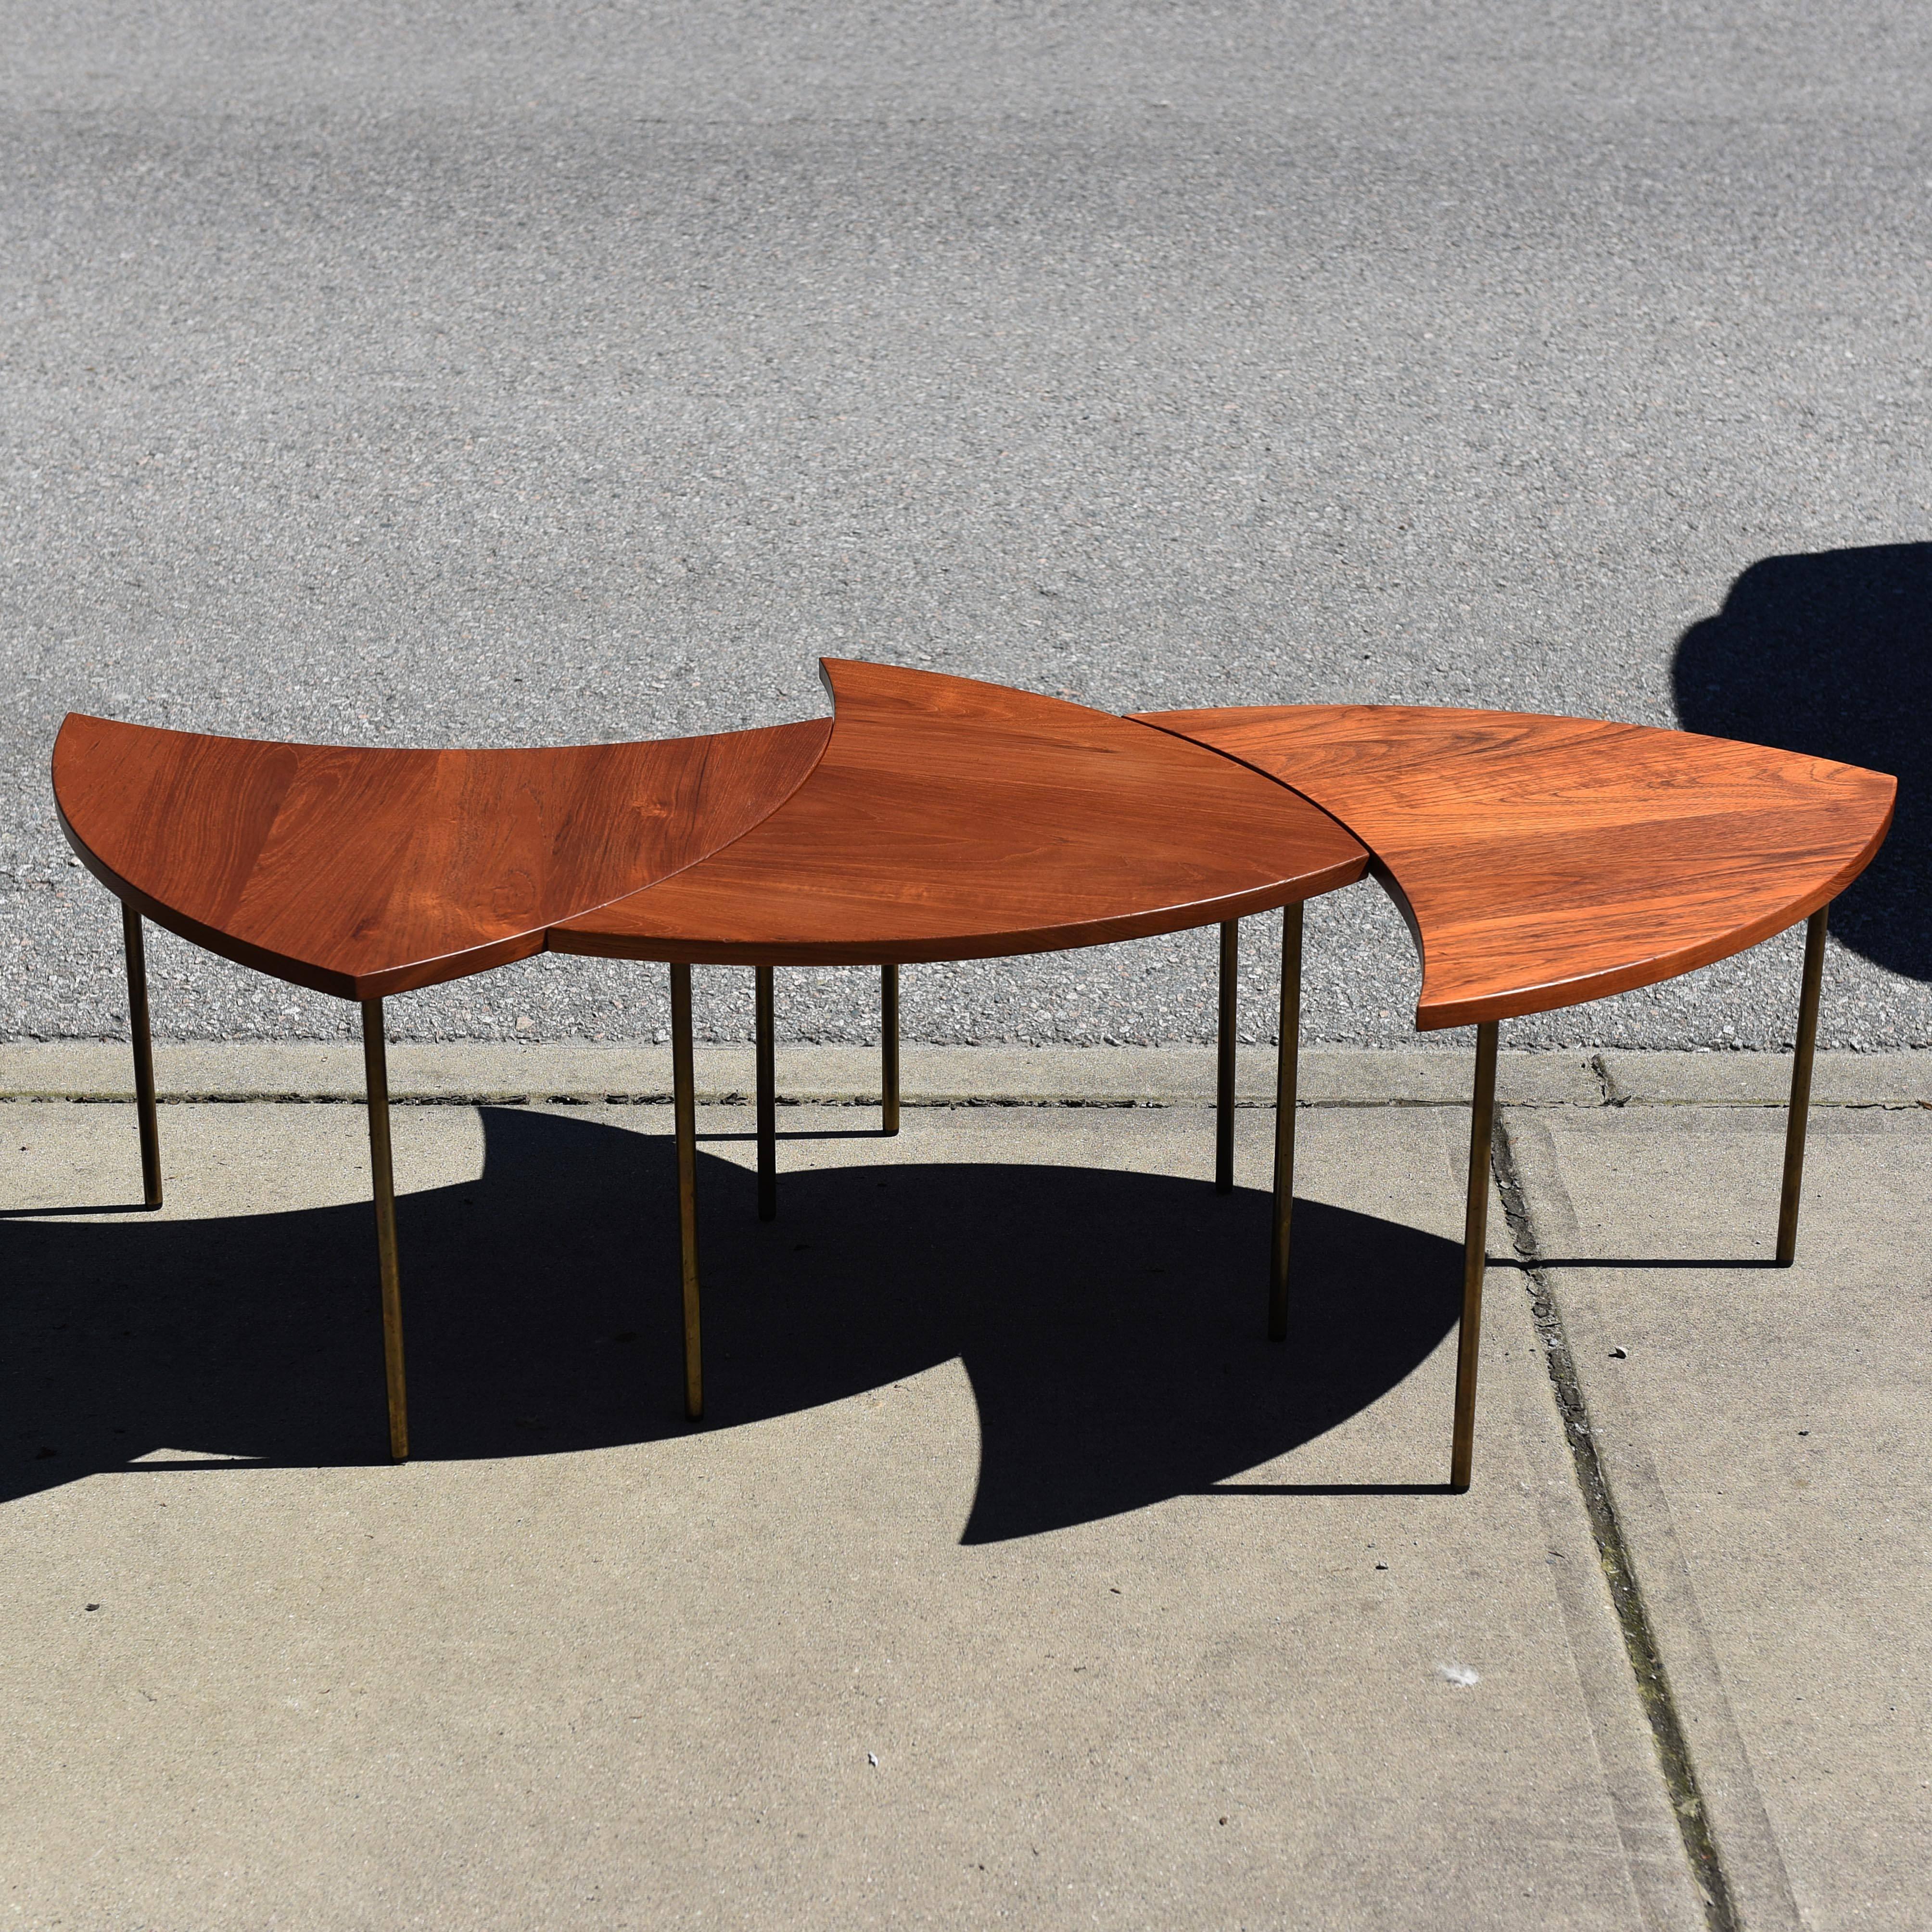 A rare set of three Peter Hvidt for France & Daverkosen segmented coffee table, model 523. Comprised of a solid teak tabletop and legs made of tubular brass.